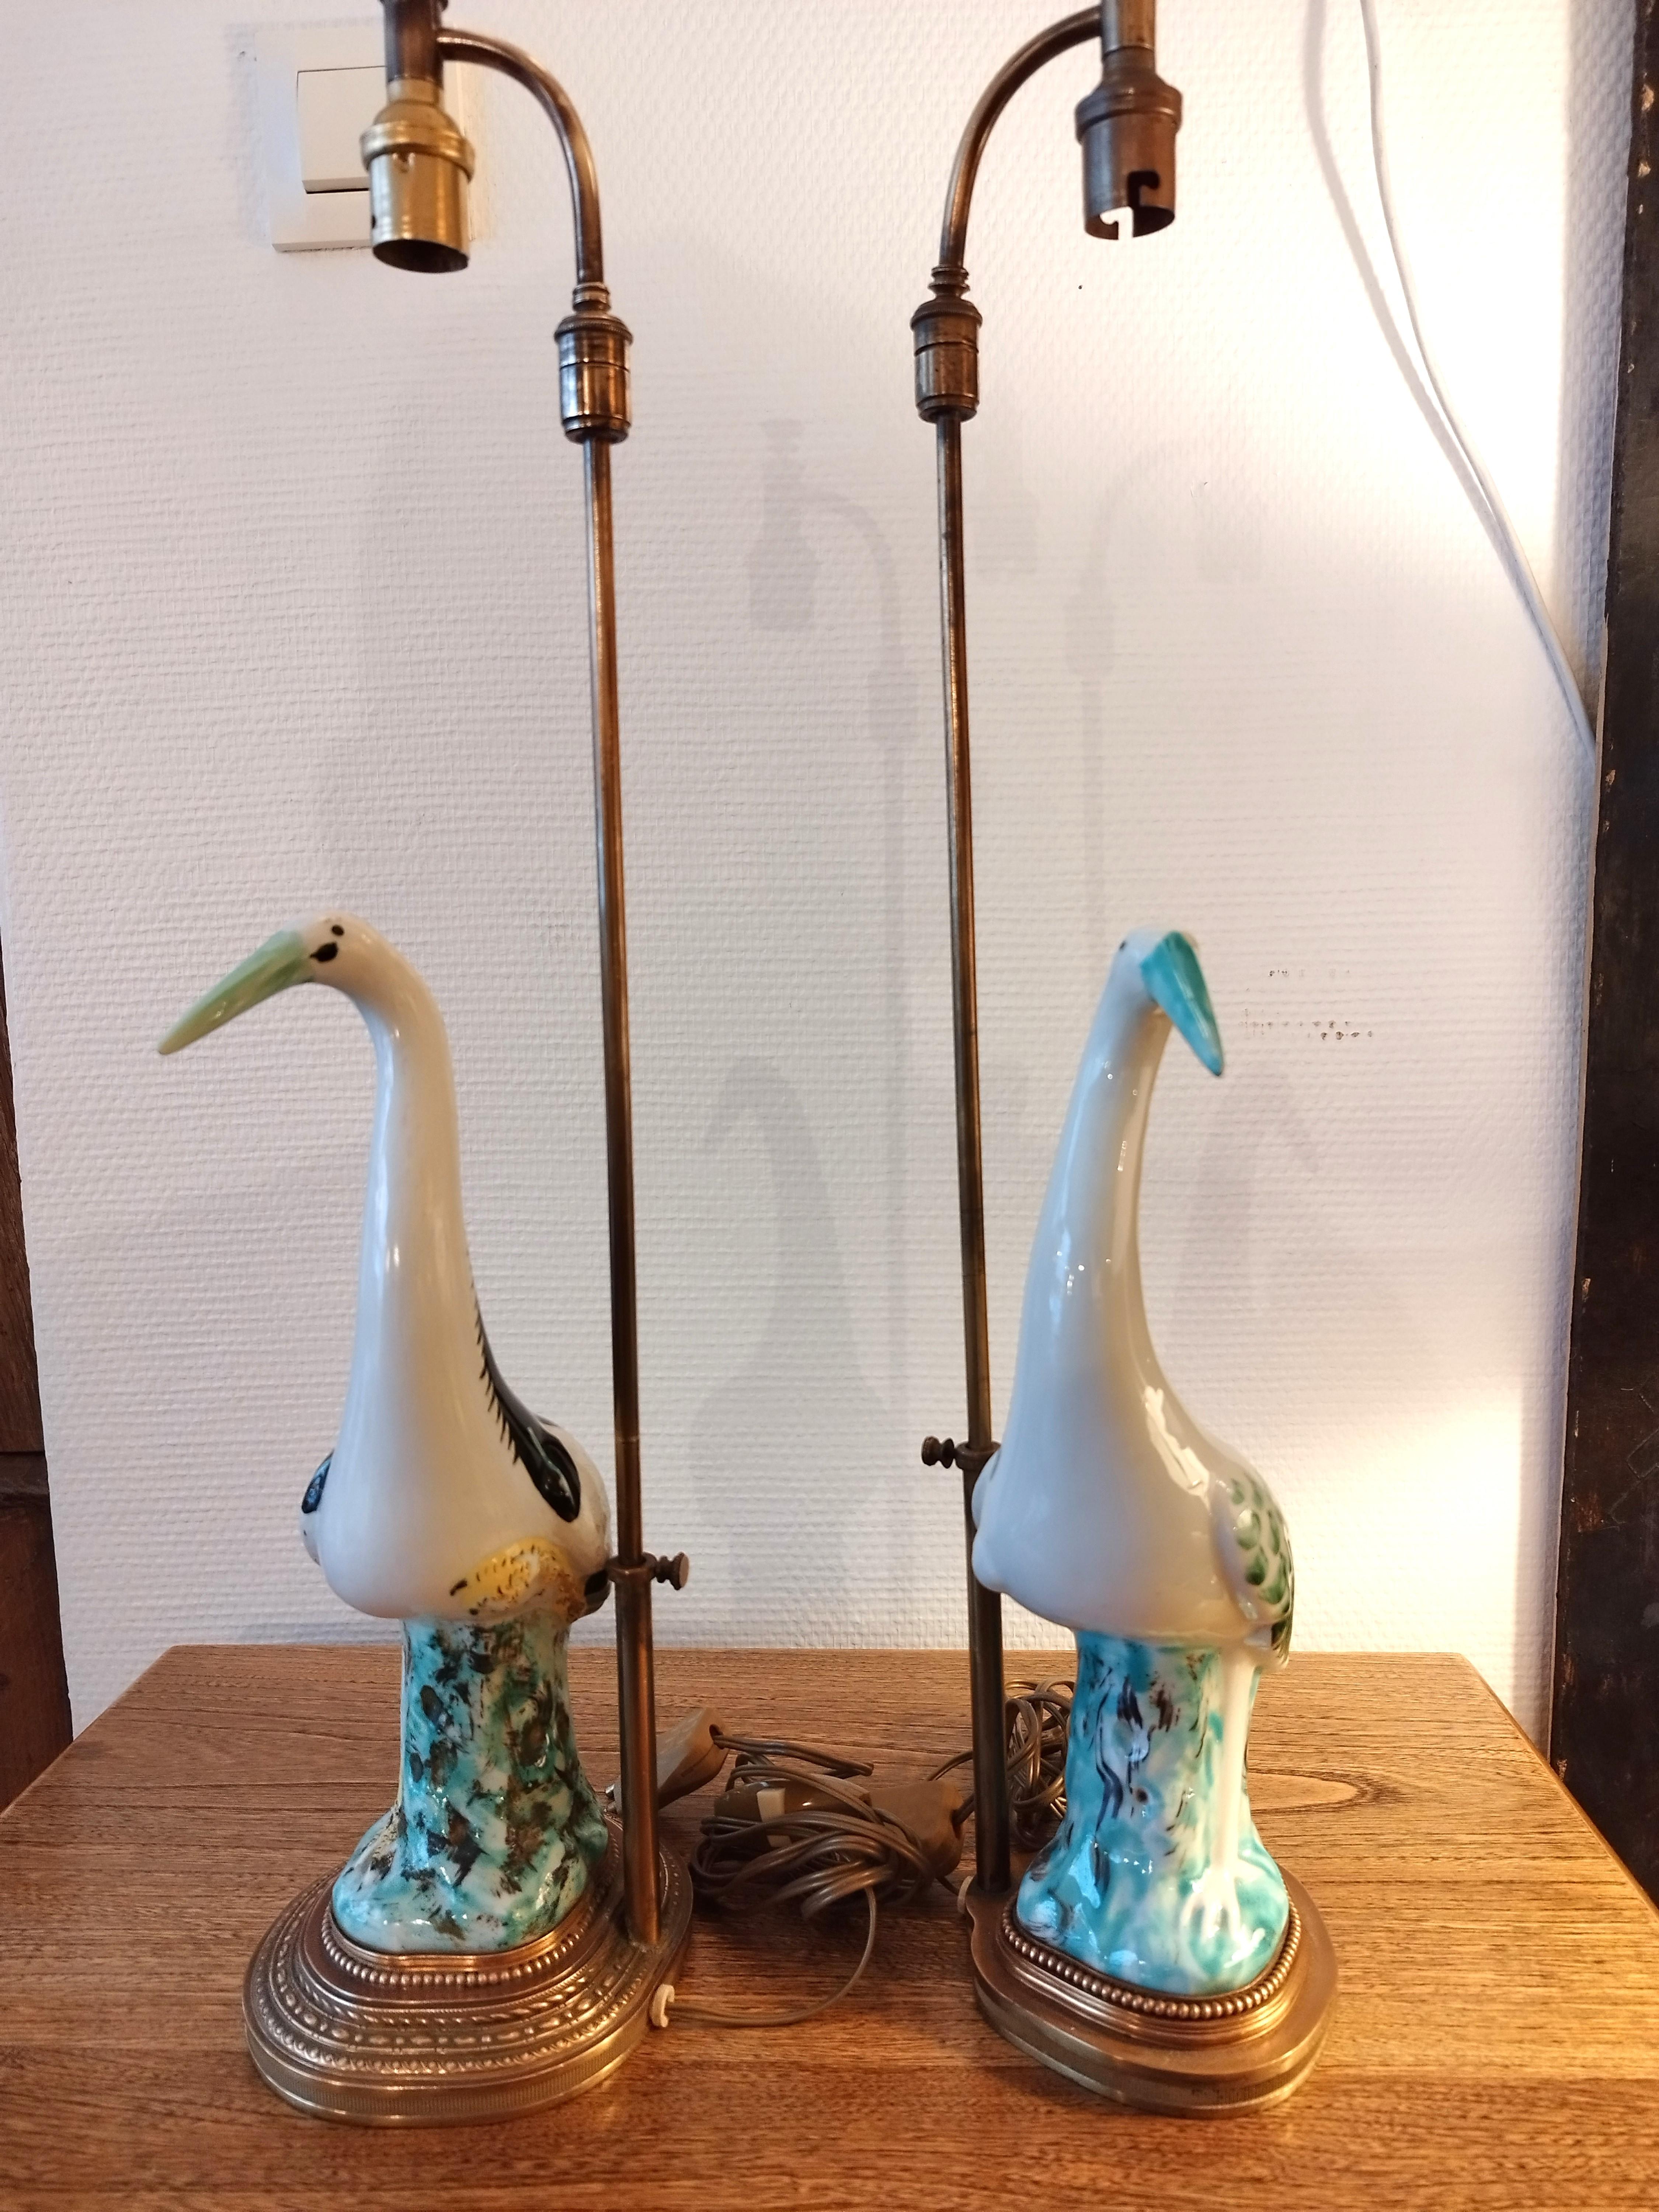 Faux pair of lovely lamps in ceramic (or porcelain ?) mounted on a gilt brass base, depicting 2 herons or storks. They are not matching, but of identical style and quality. The lamp shades have just been custom made to give the lamps a more modern